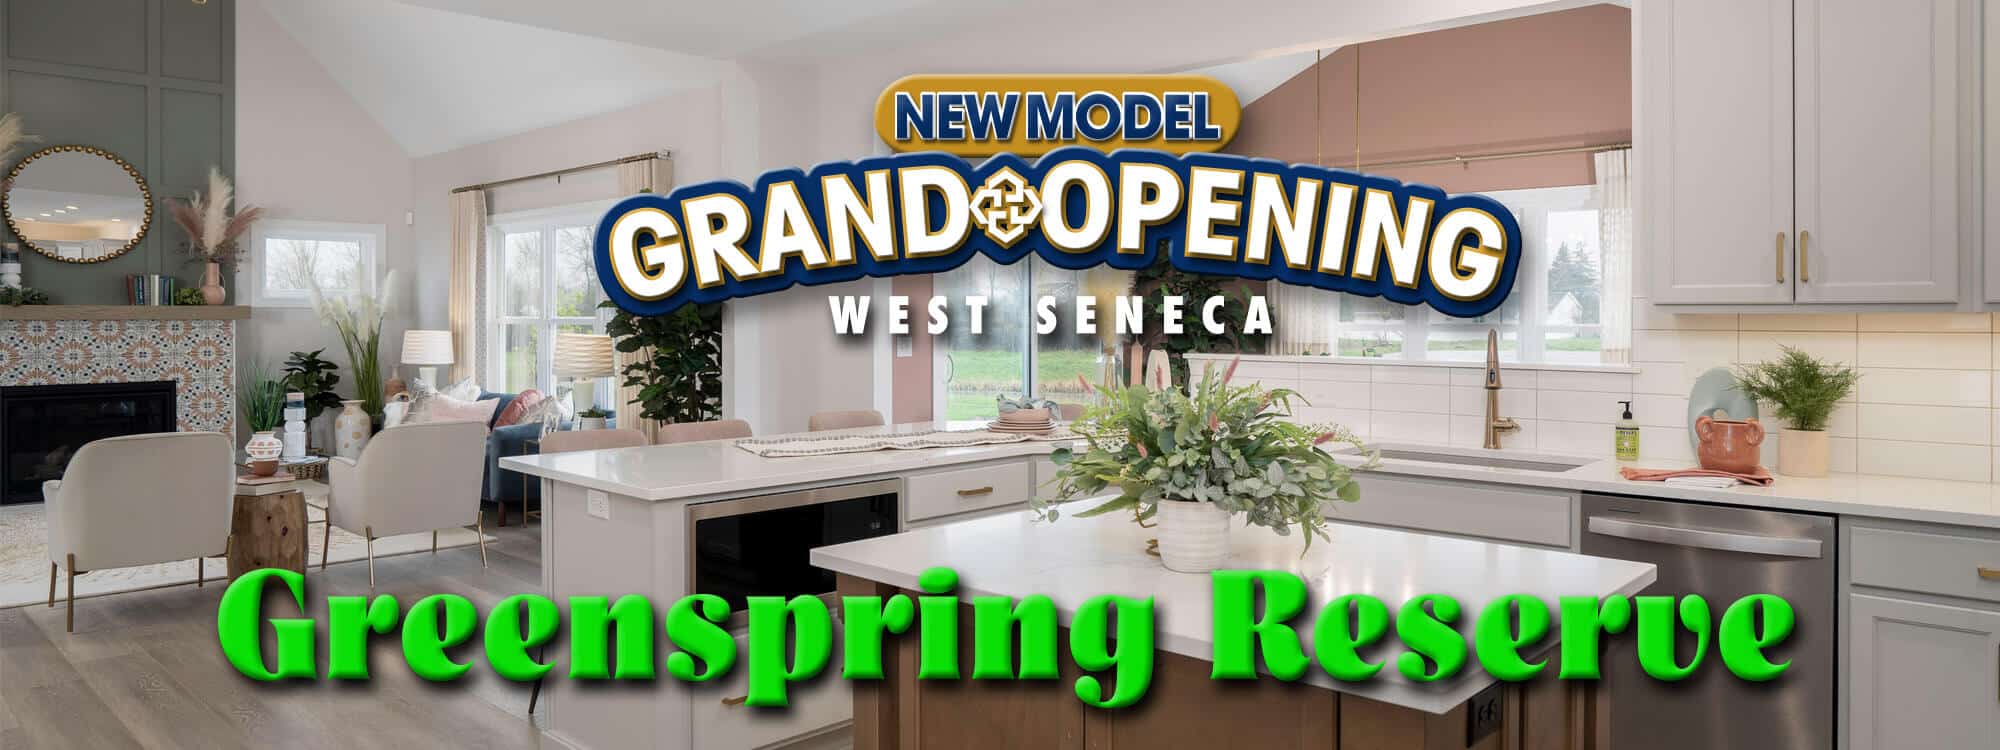 Marrano Introduces the Greenspring Reserve Grand Opening